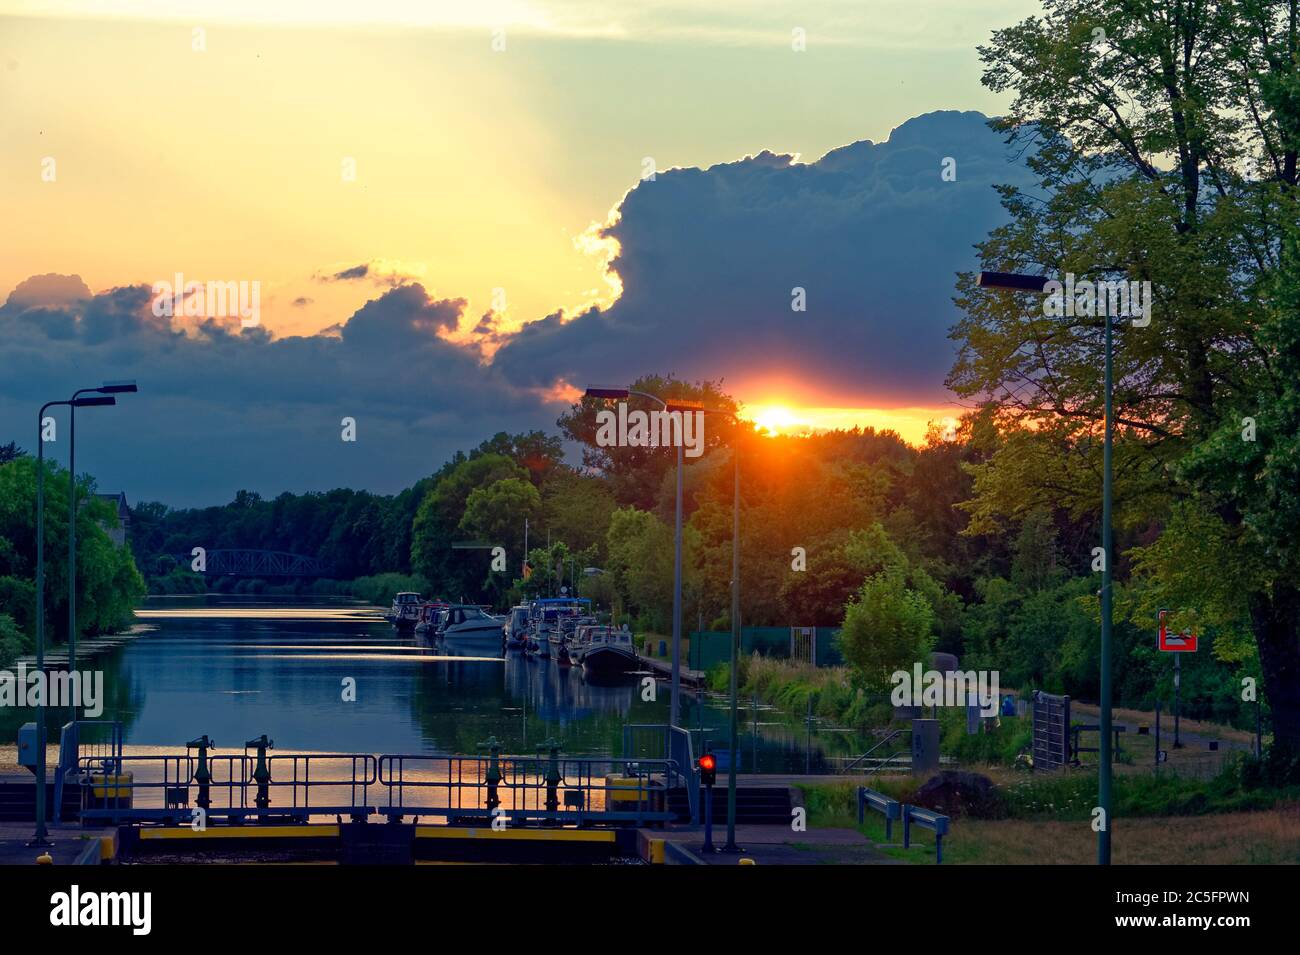 Sunset at Limmer Schleuse by Continental Limmer. Stock Photo